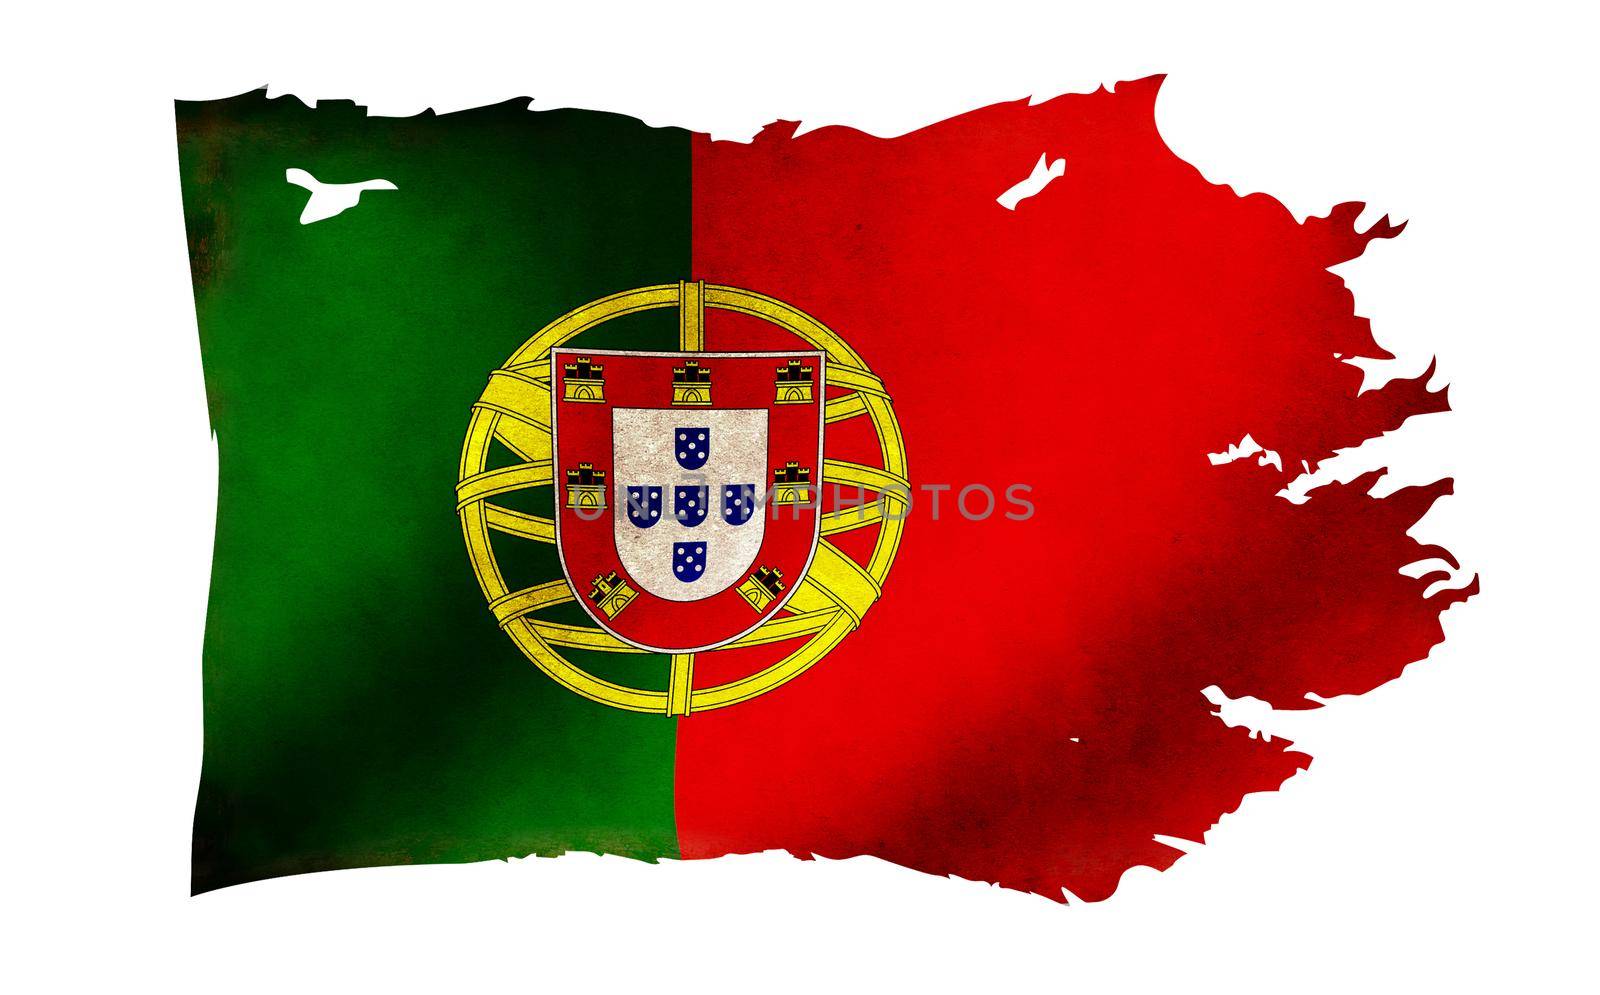 Dirty and torn country flag illustration / Portugal by barks